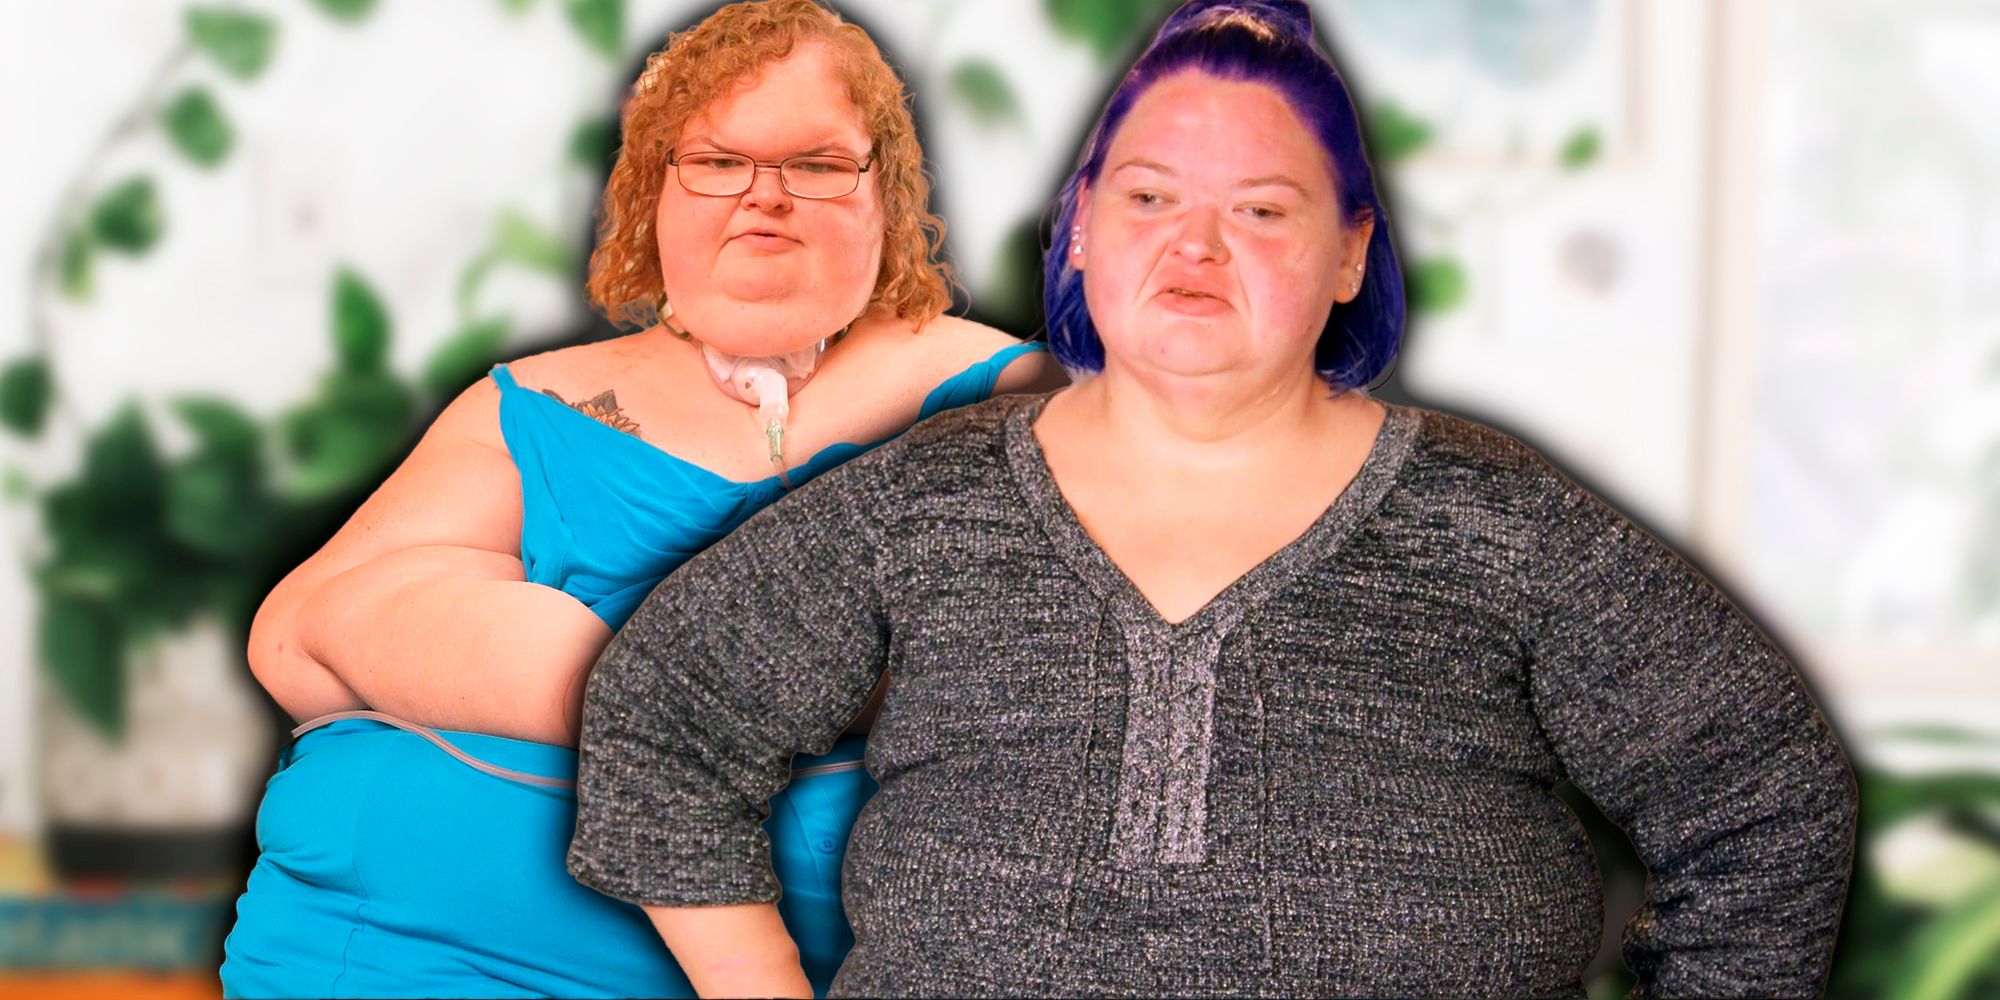 Amy and Tammy Slaton montage from 1000-lb Sisters